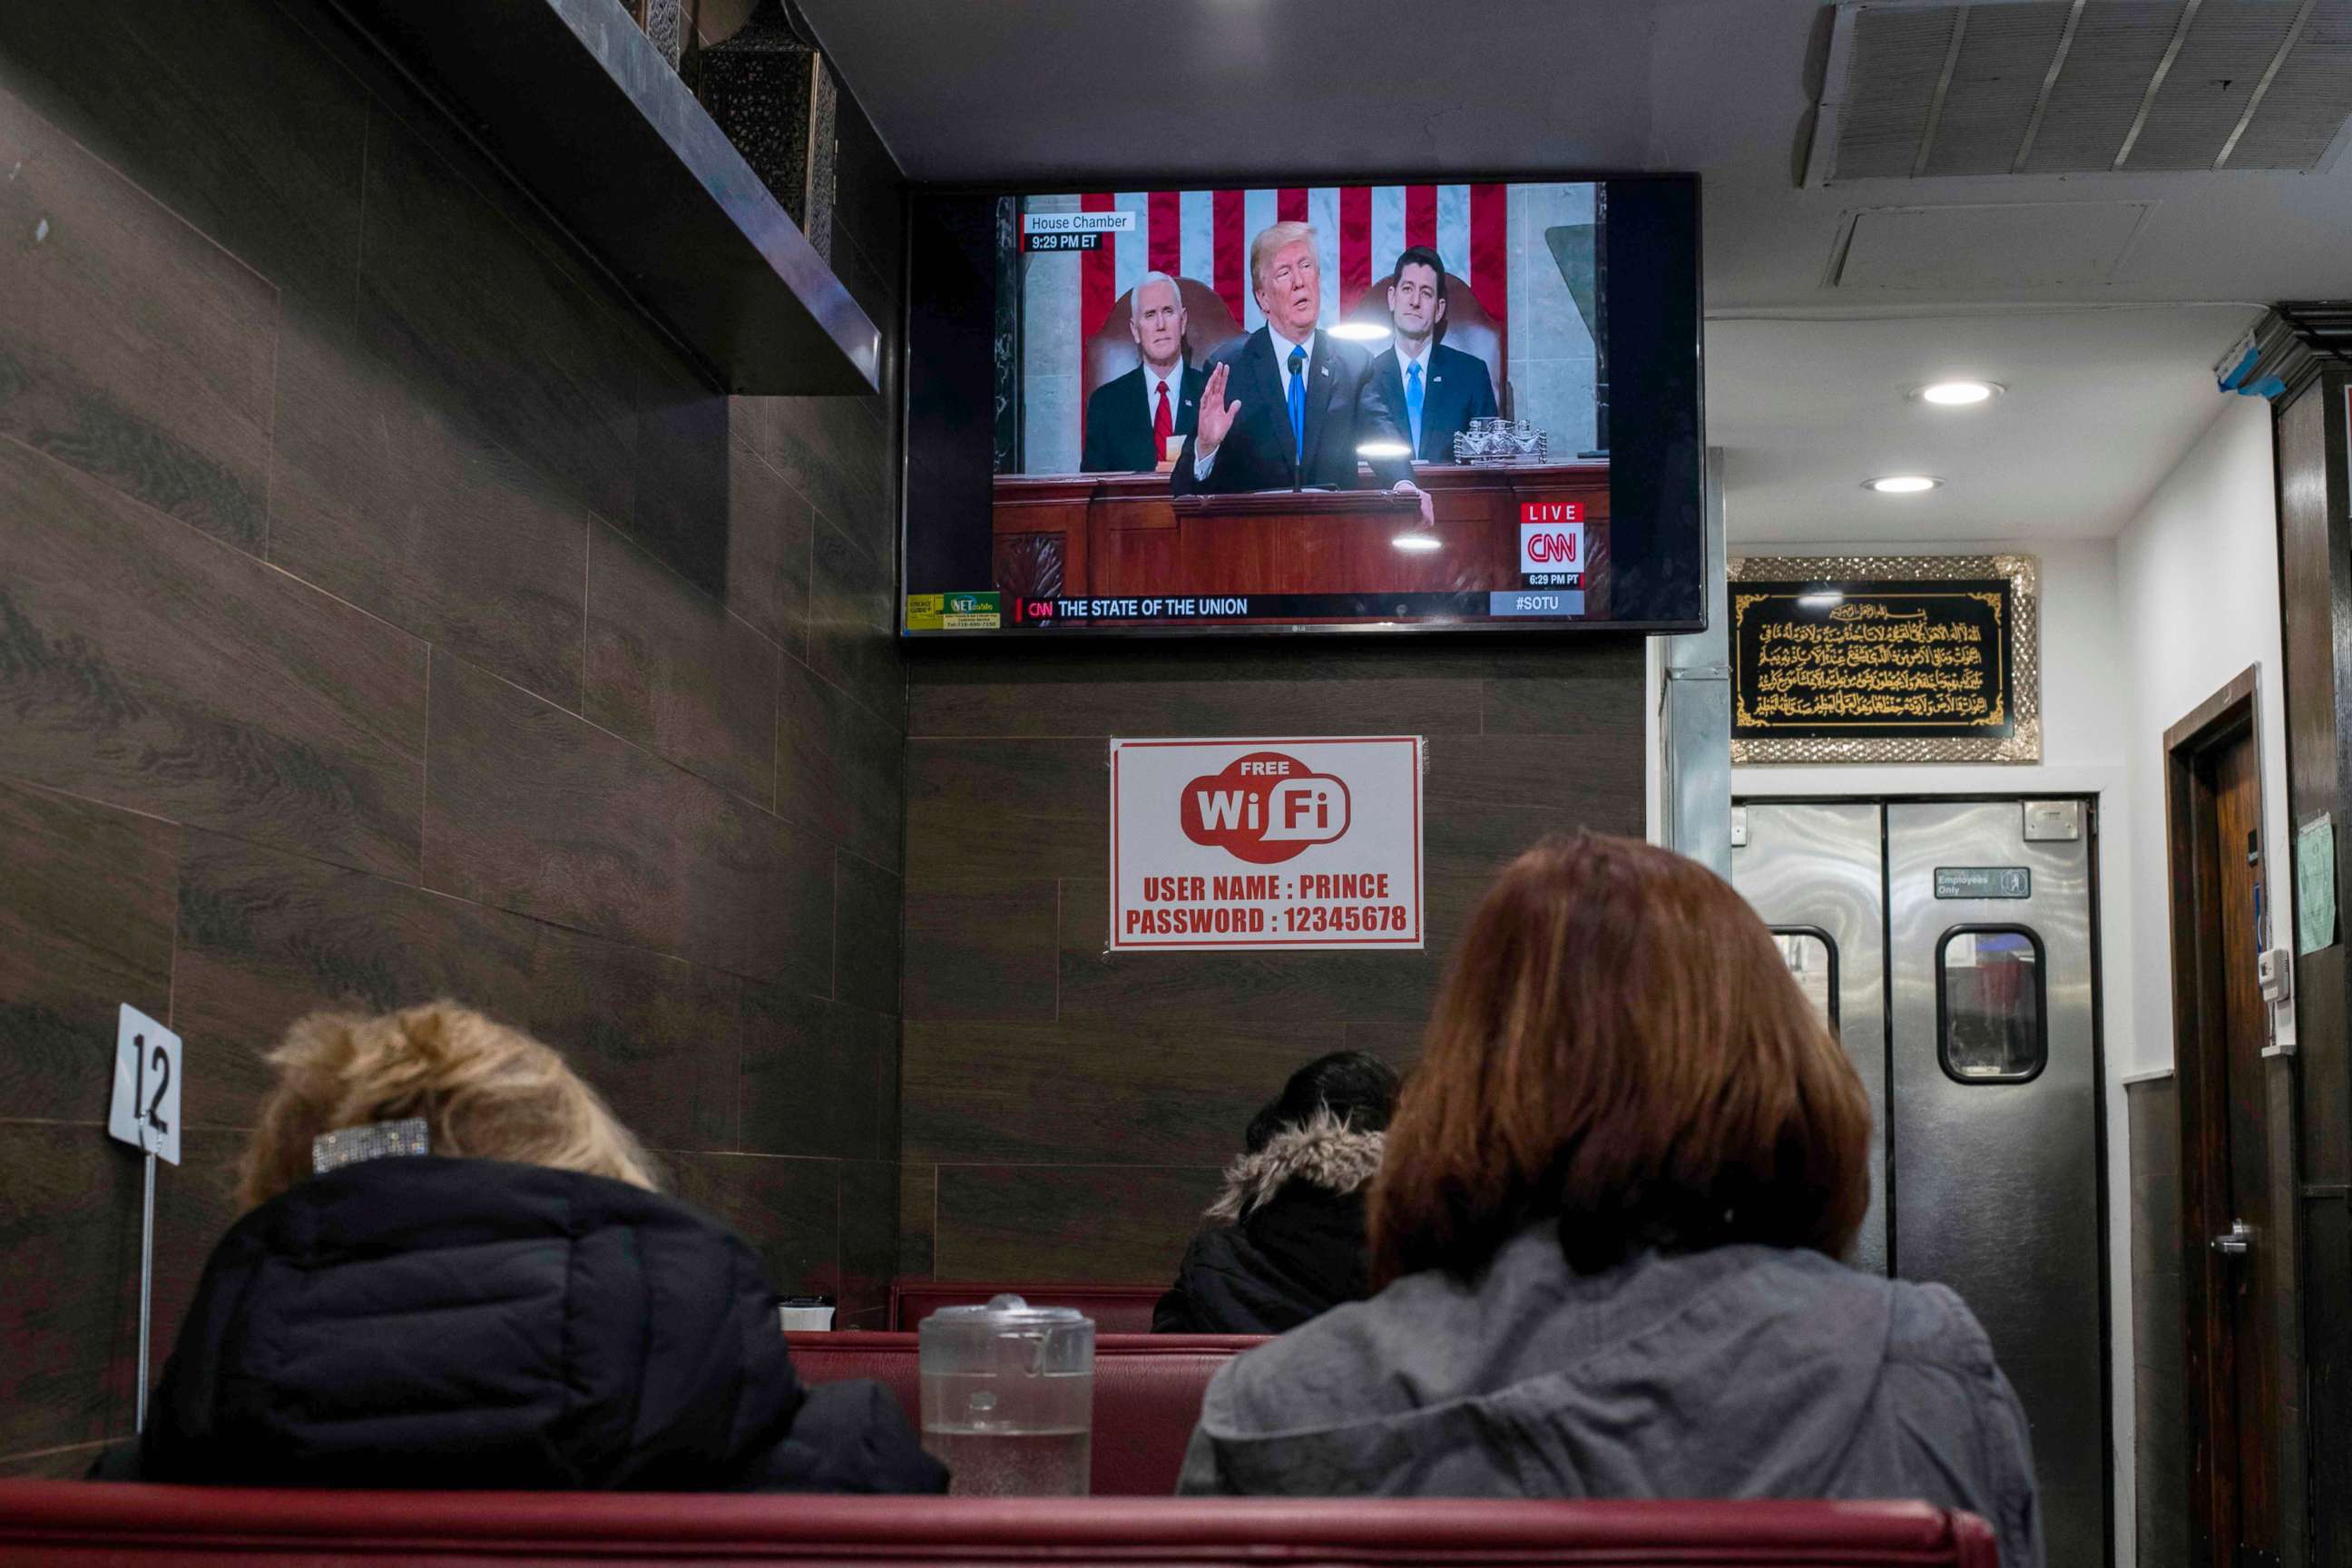 PHOTO: President Donald Trump is shown on a TV, delivering his State of the Union Speech, in a restaurant in New York on Jan. 30, 2018.